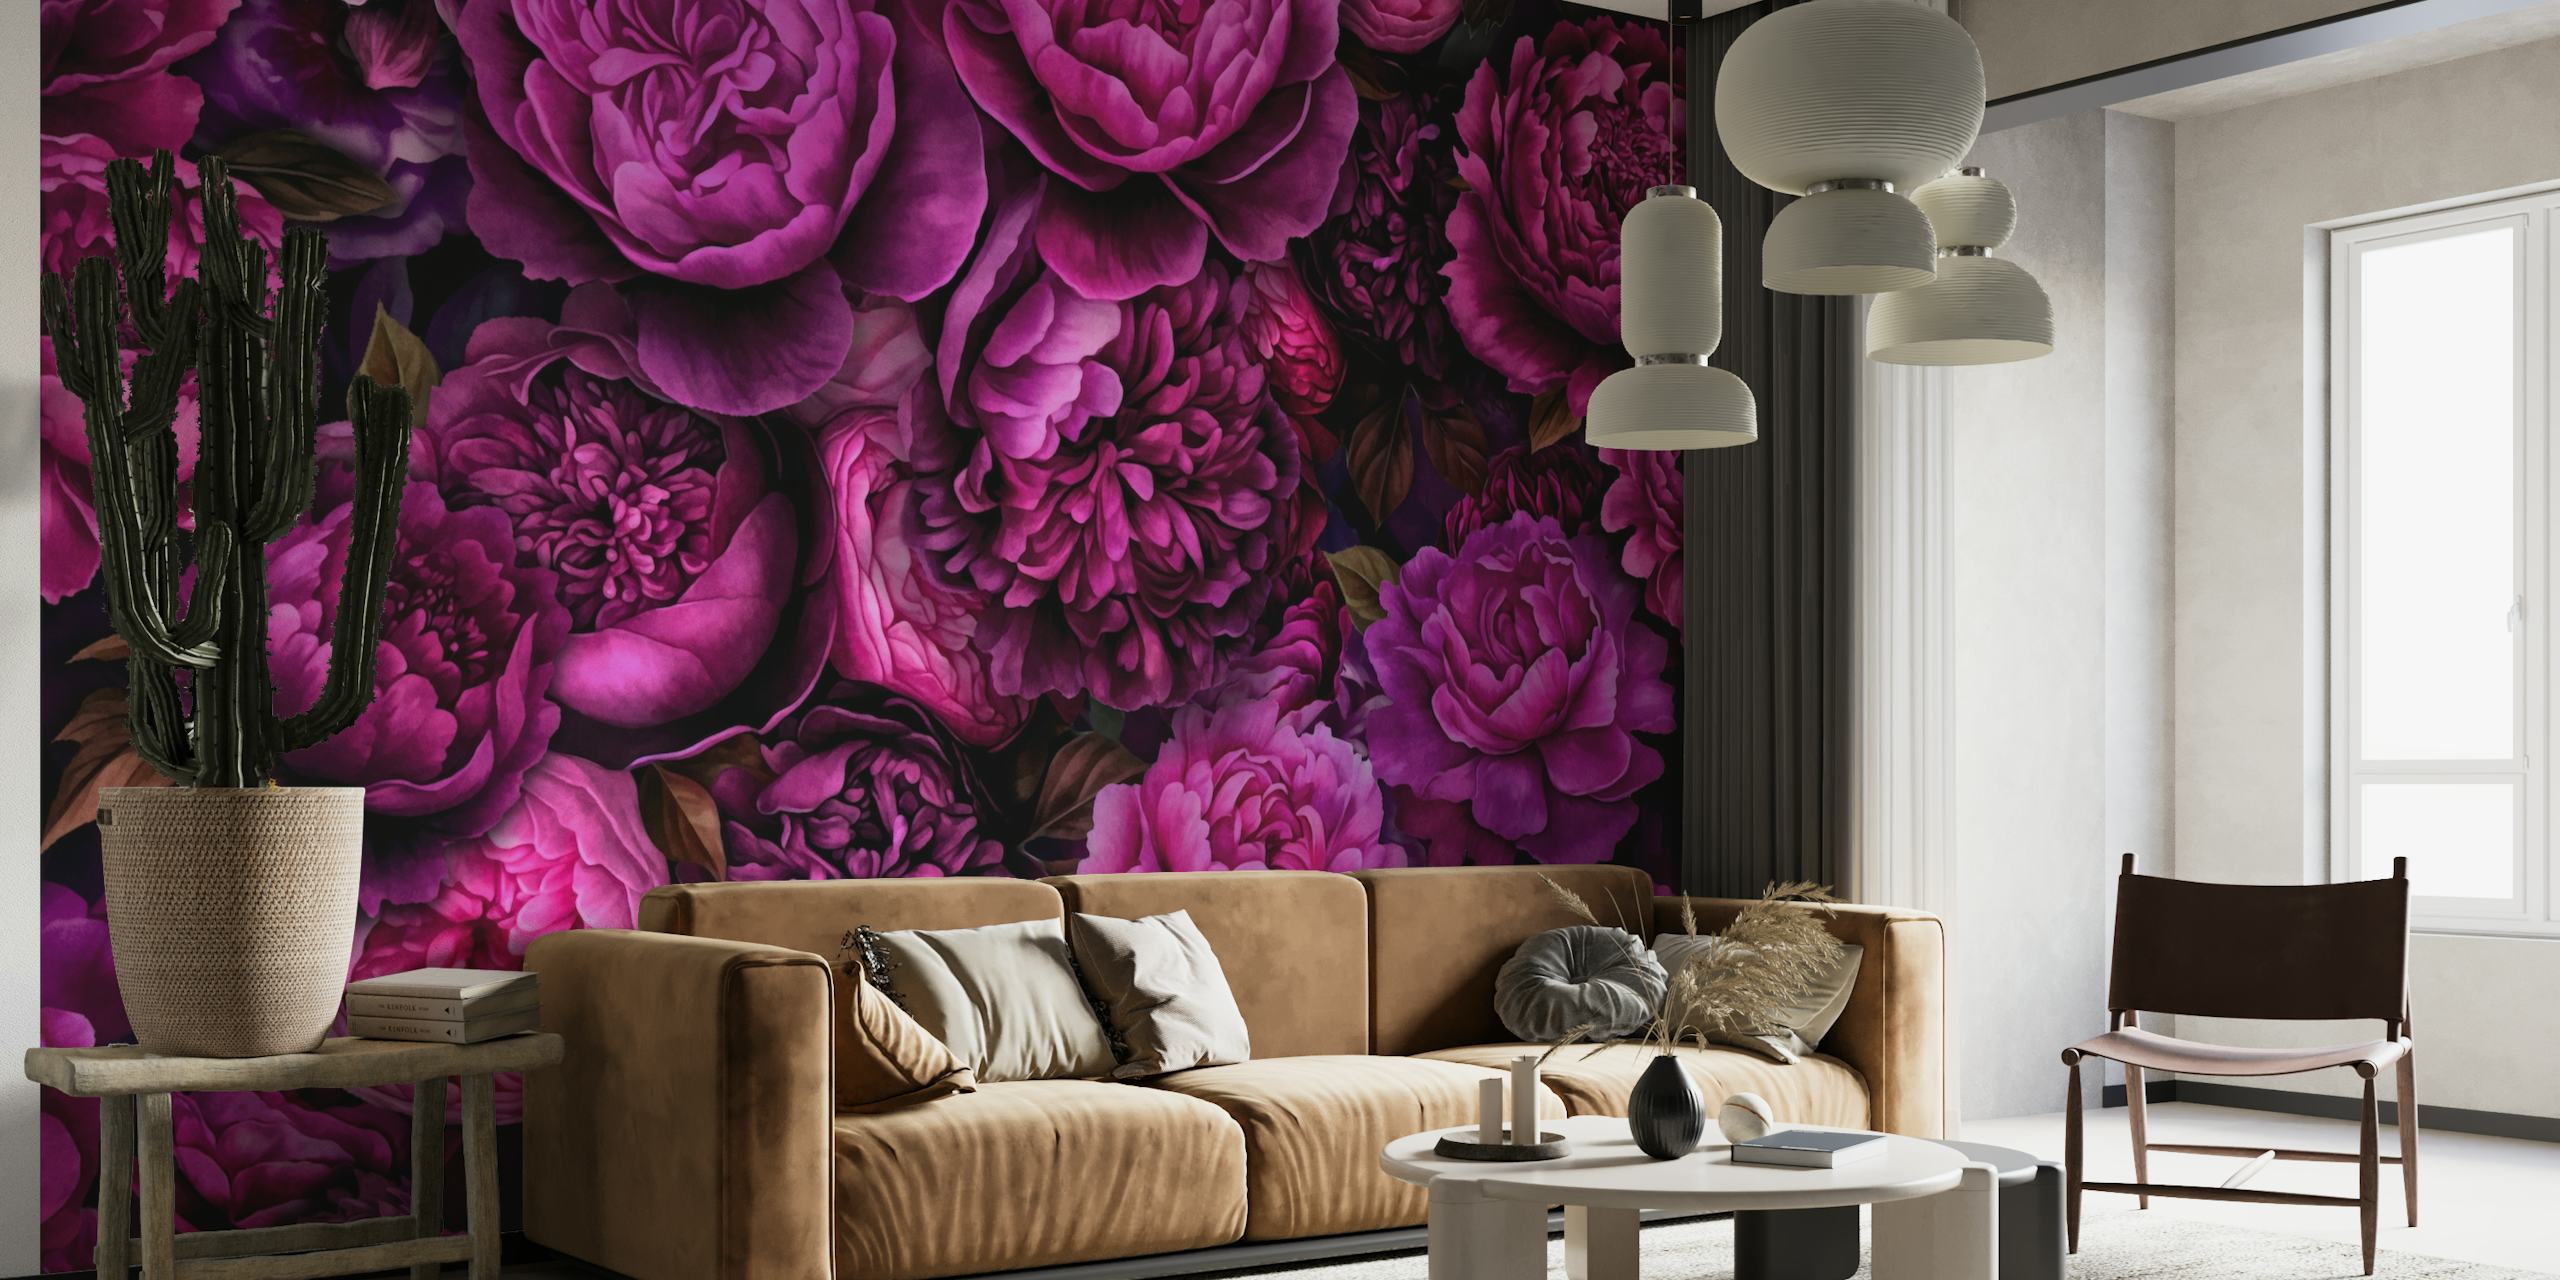 Luxurious pink and purple roses against a dark background in the Moody Flowers Pink Baroque Opulence wall mural